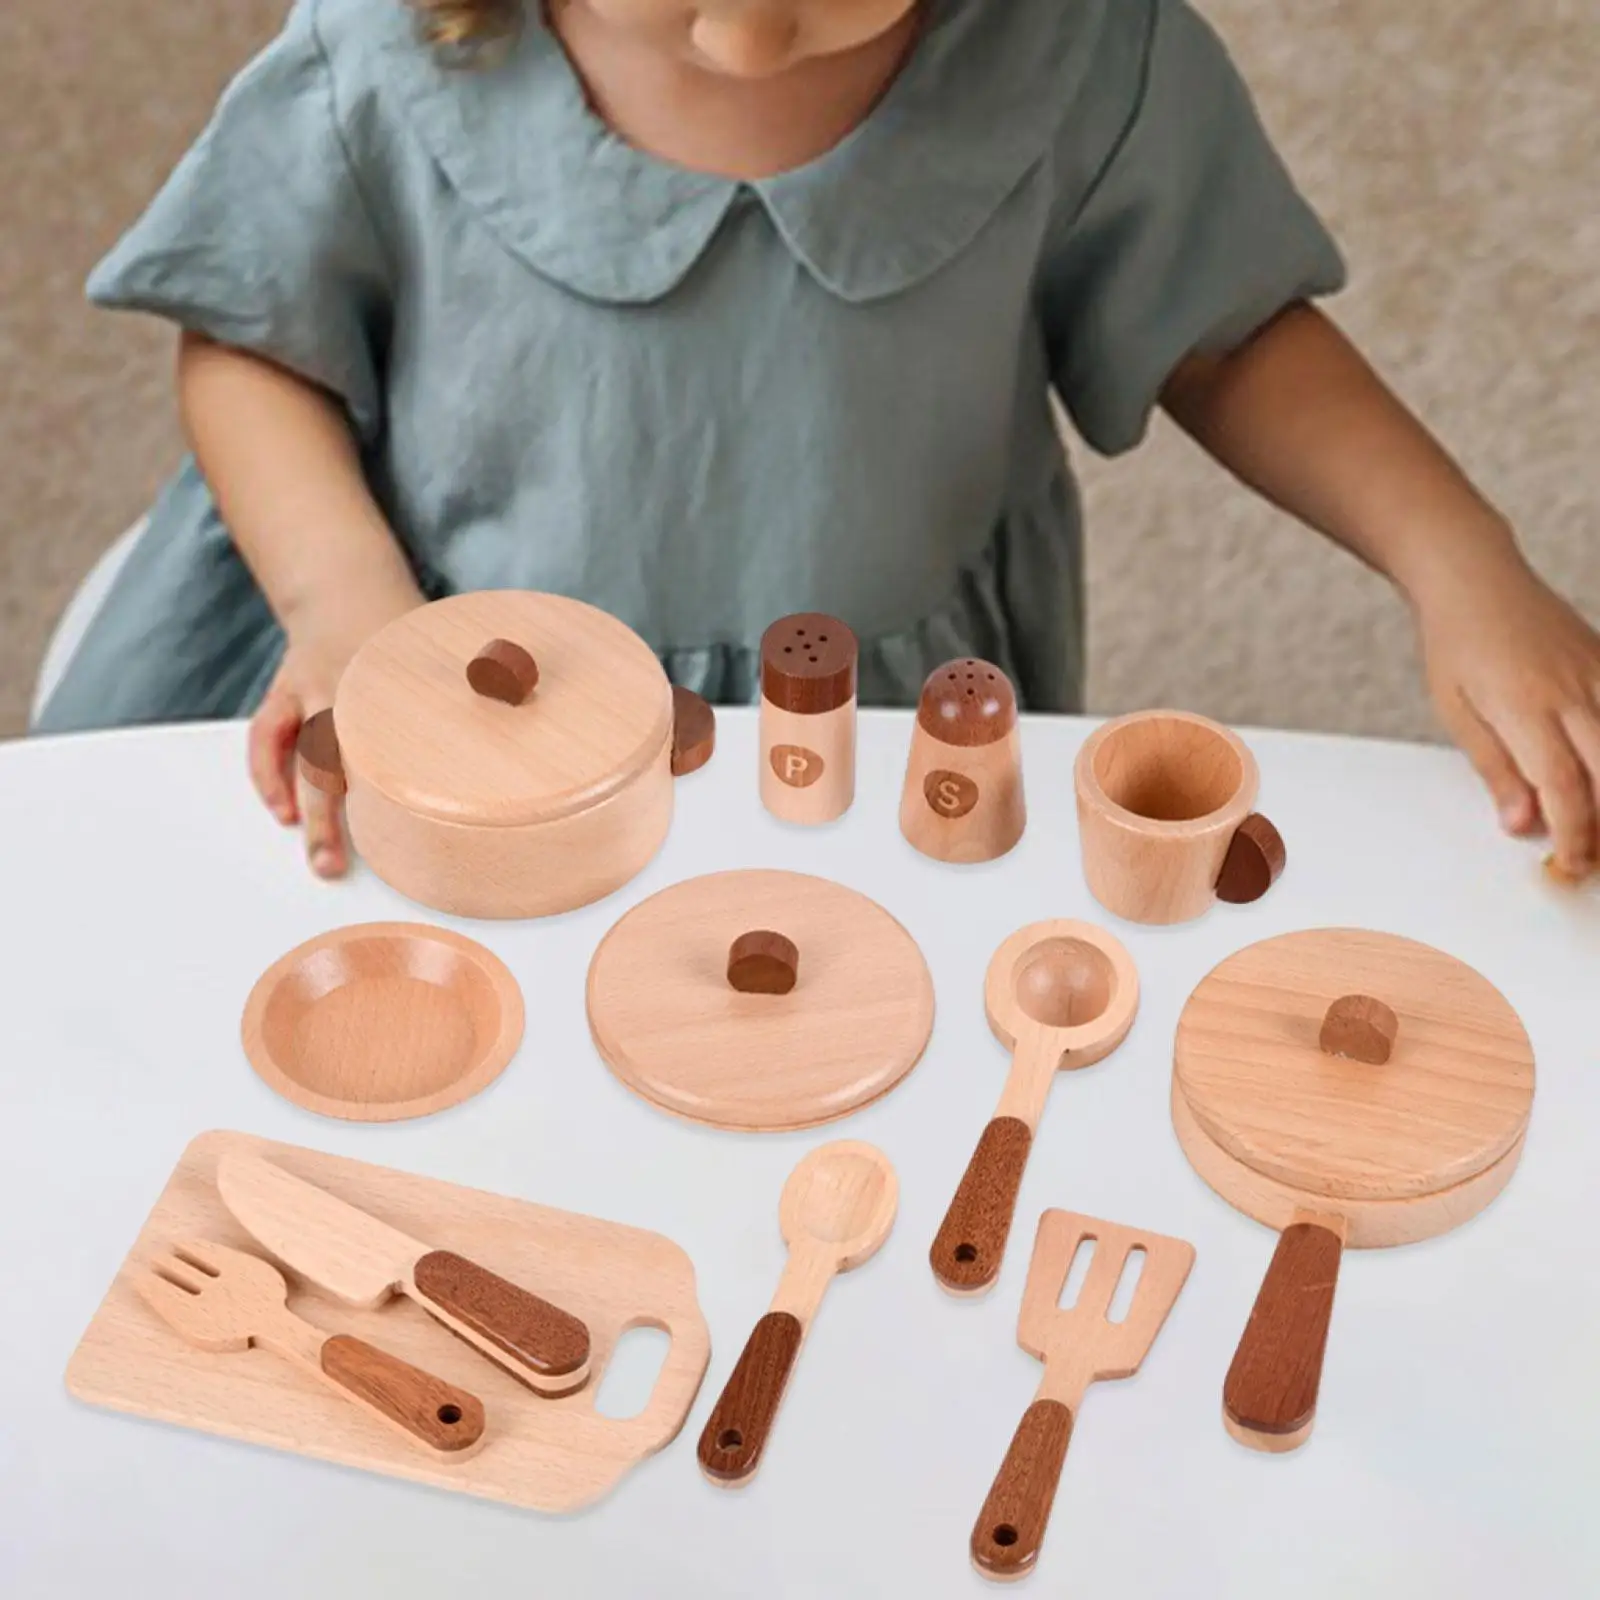 

Wooden Pretend Play Cooking Set for Kids - Educational Kitchen Toy